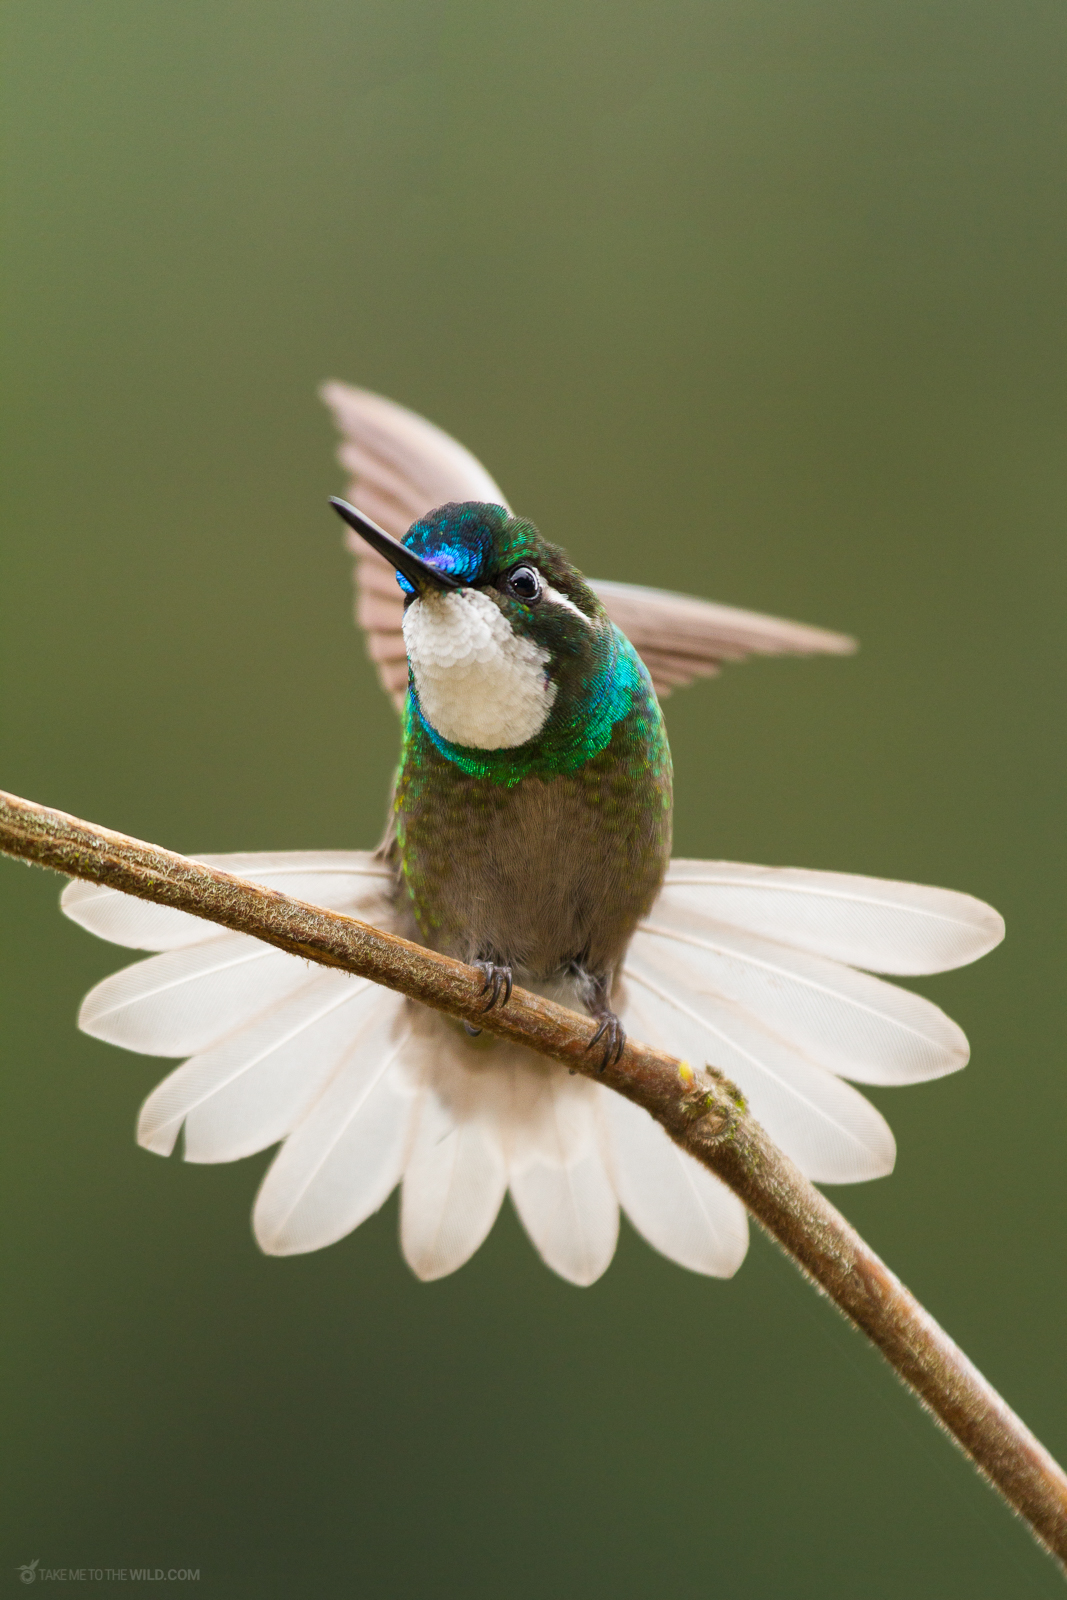 White-throated Mountaingem (Lampornis castaneoventris) perched on a branch at the highlands of Costa Rica